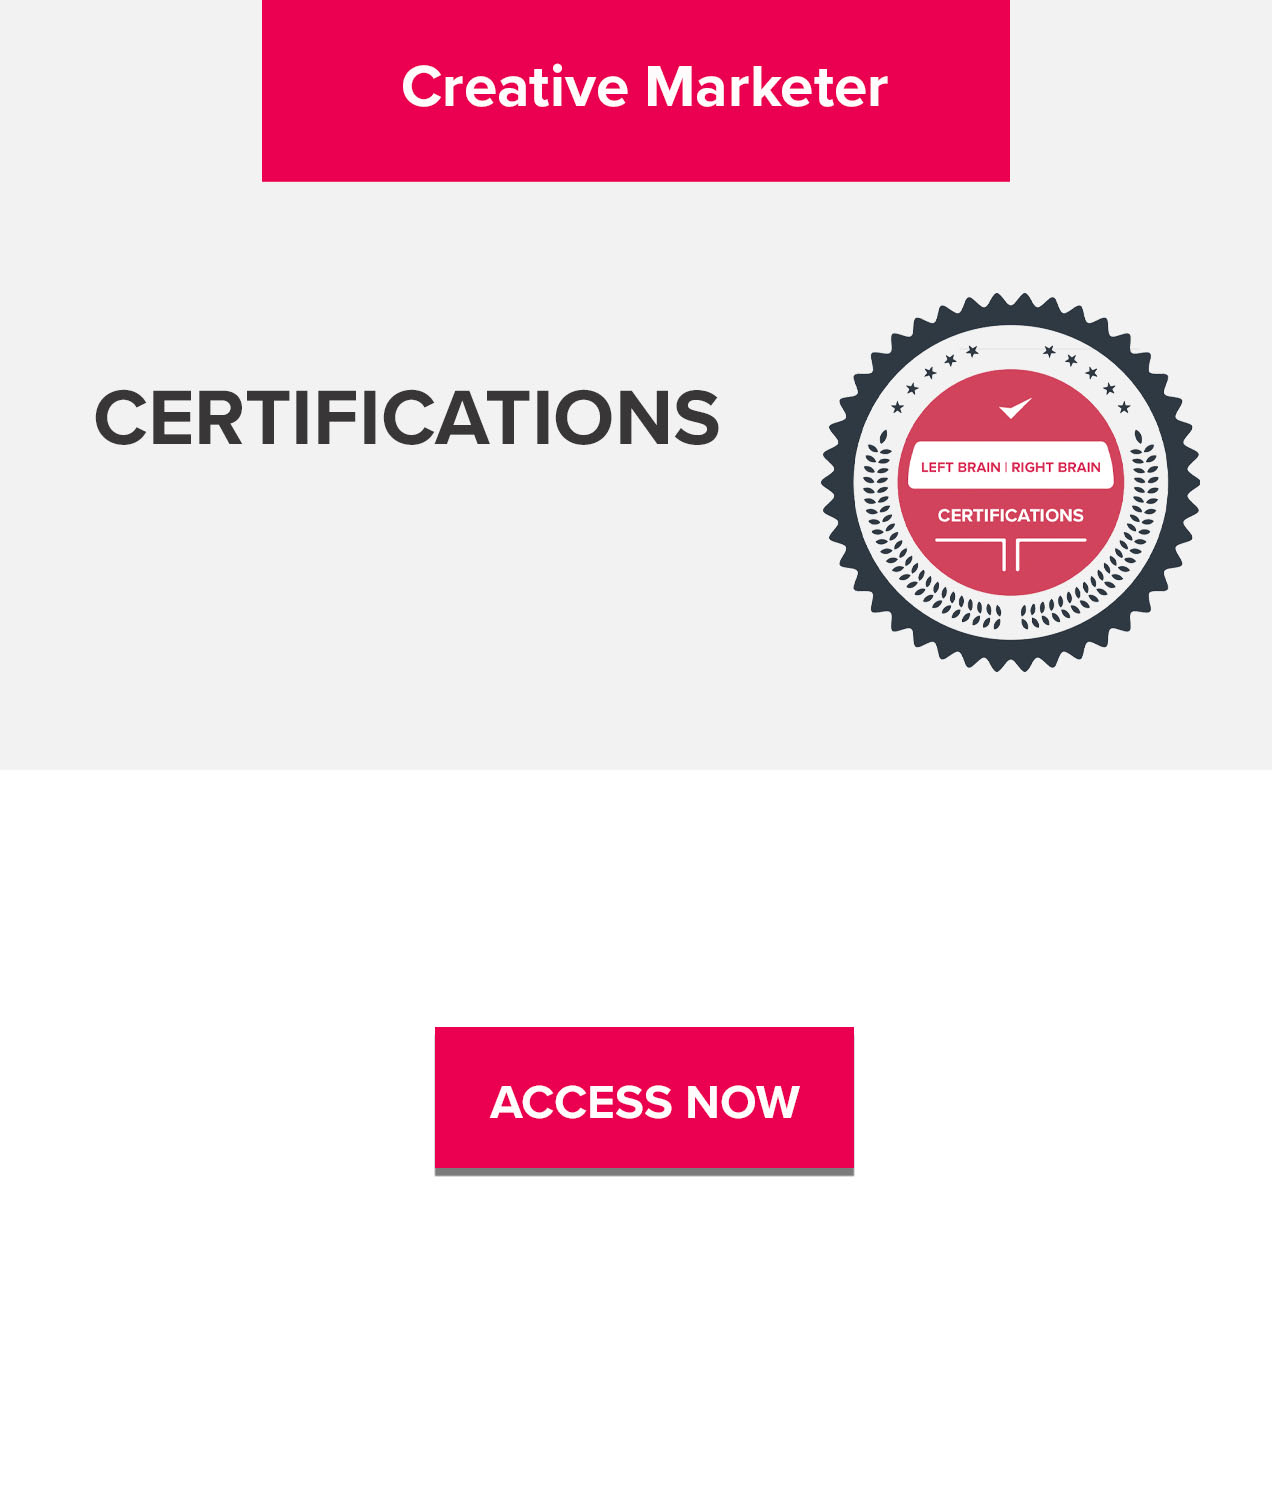 CMO Dashboard Preview Creative Marketer Certification